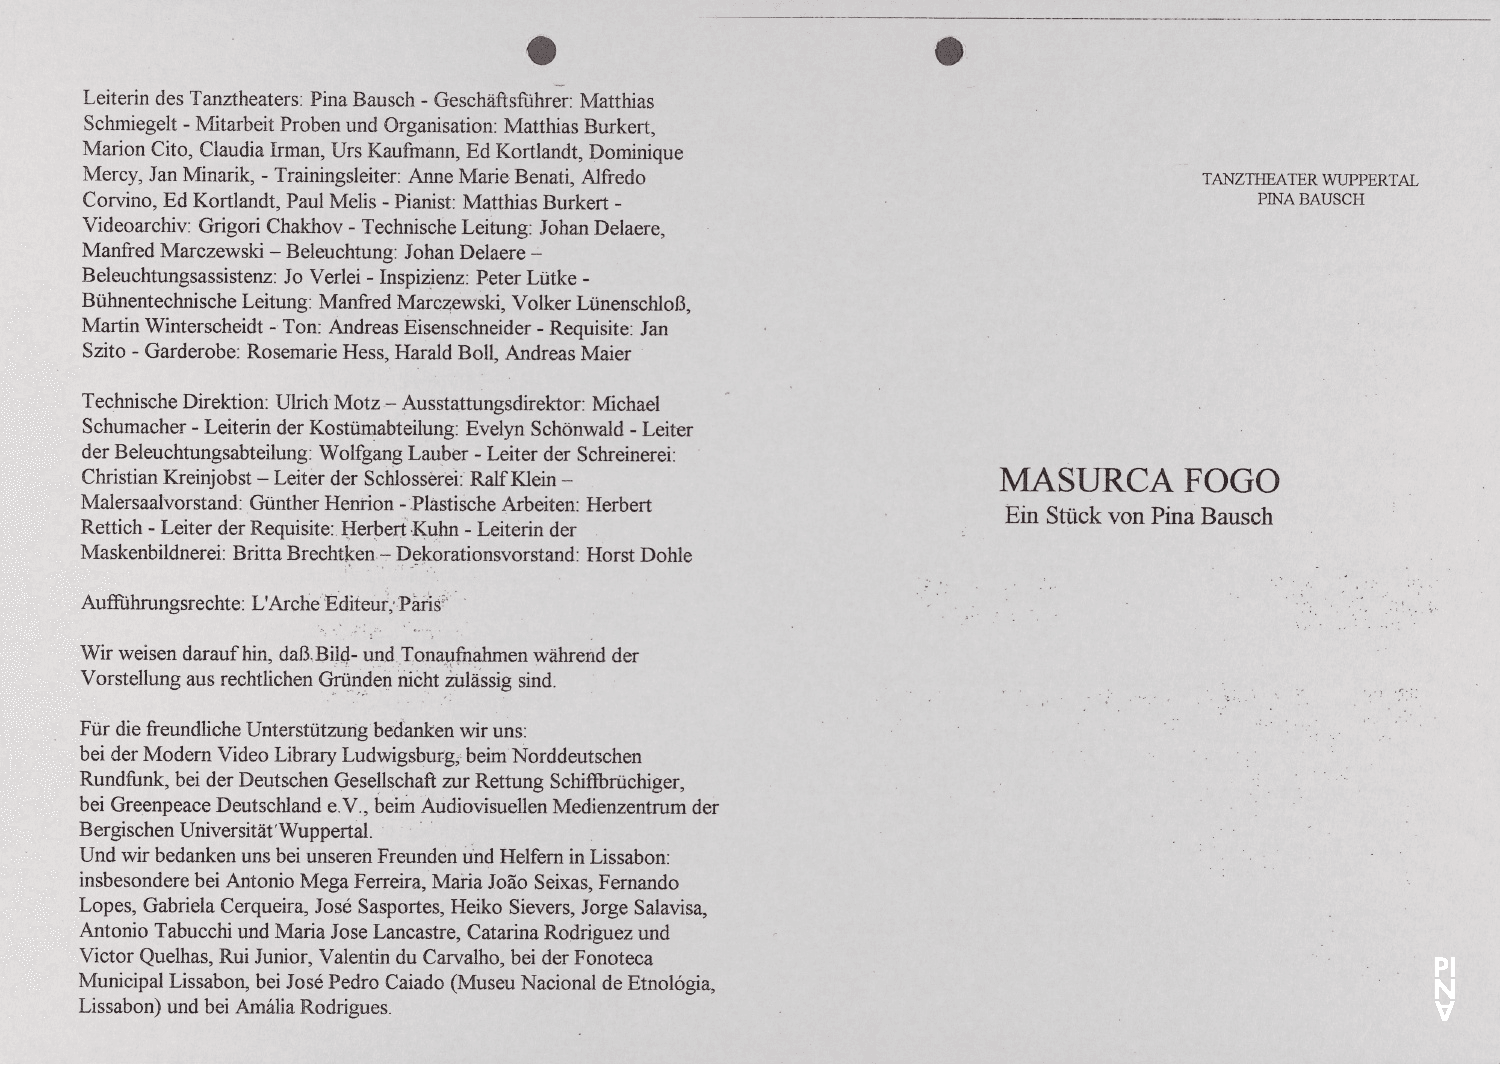 Evening leaflet for “Masurca Fogo” by Pina Bausch with Tanztheater Wuppertal in in Wuppertal, April 4, 1998